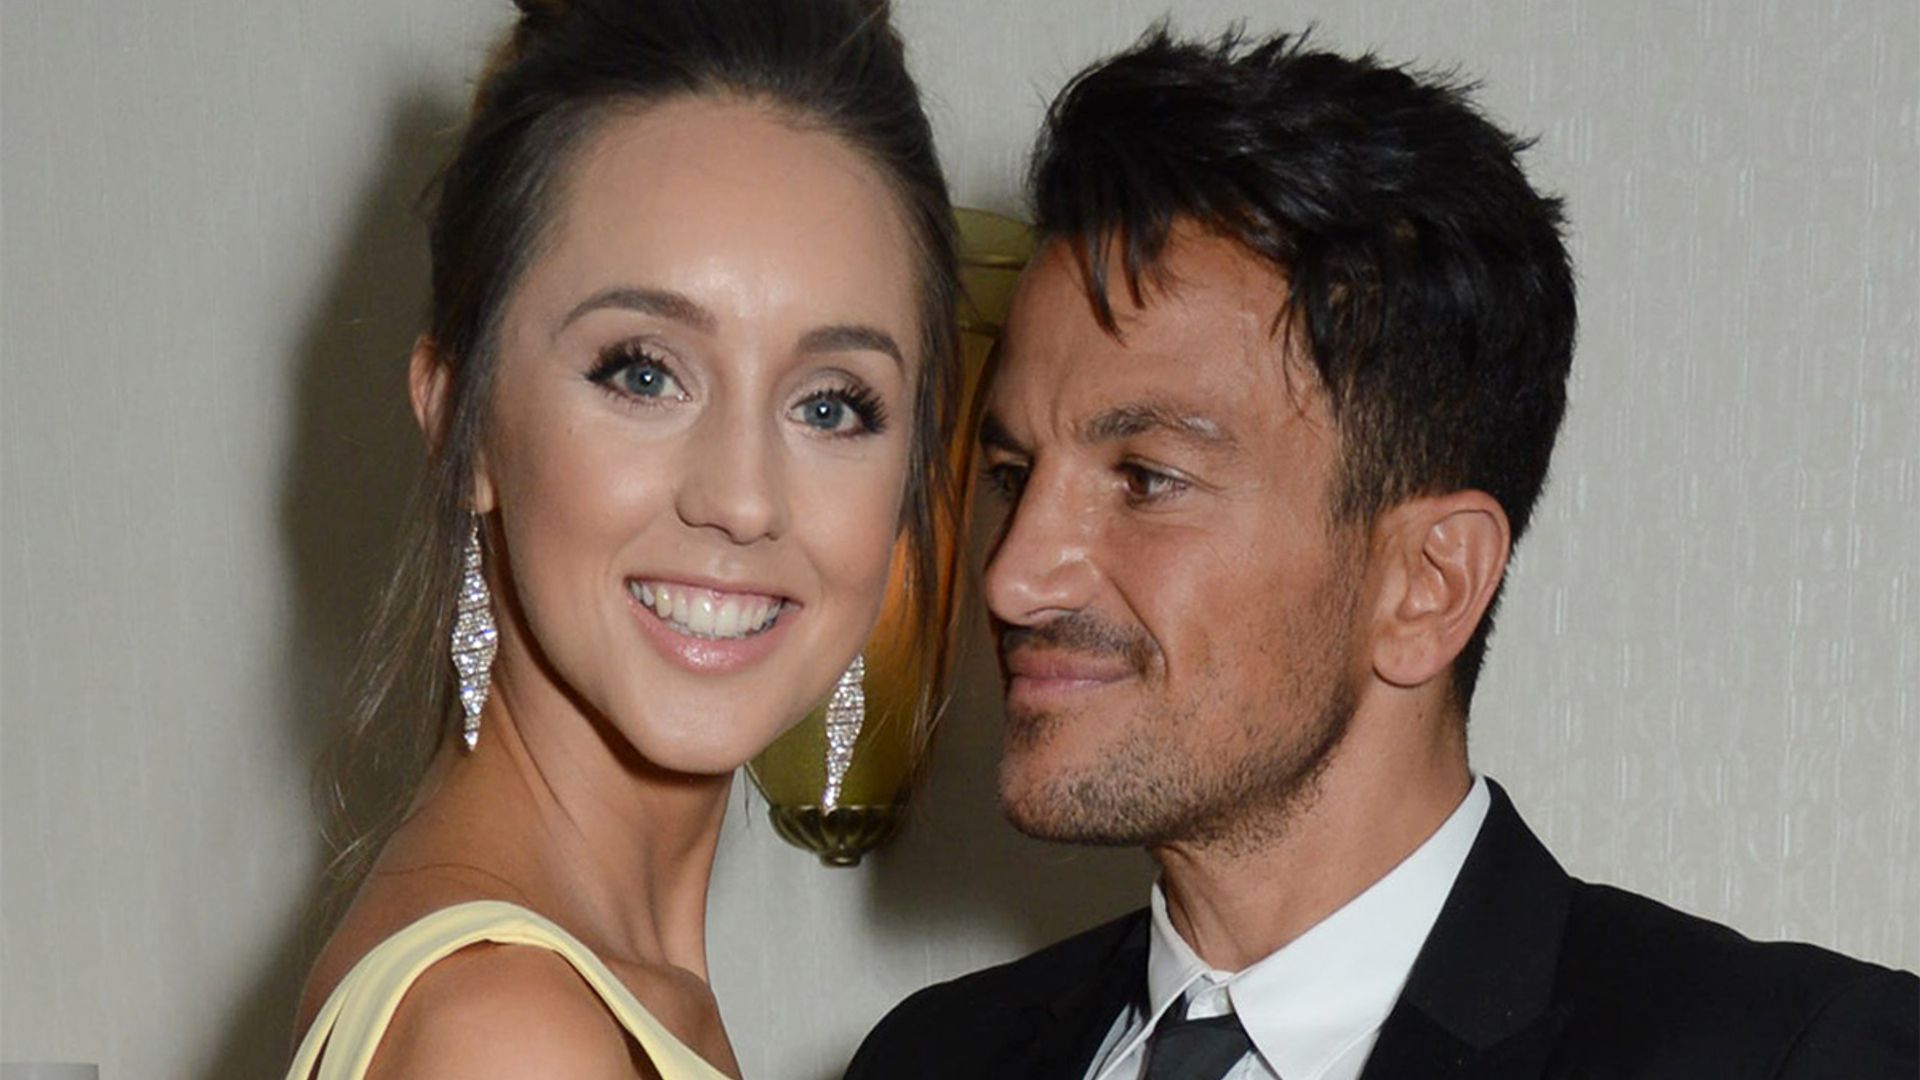 Peter Andre's wife Emily stuns in the perfect date night dress